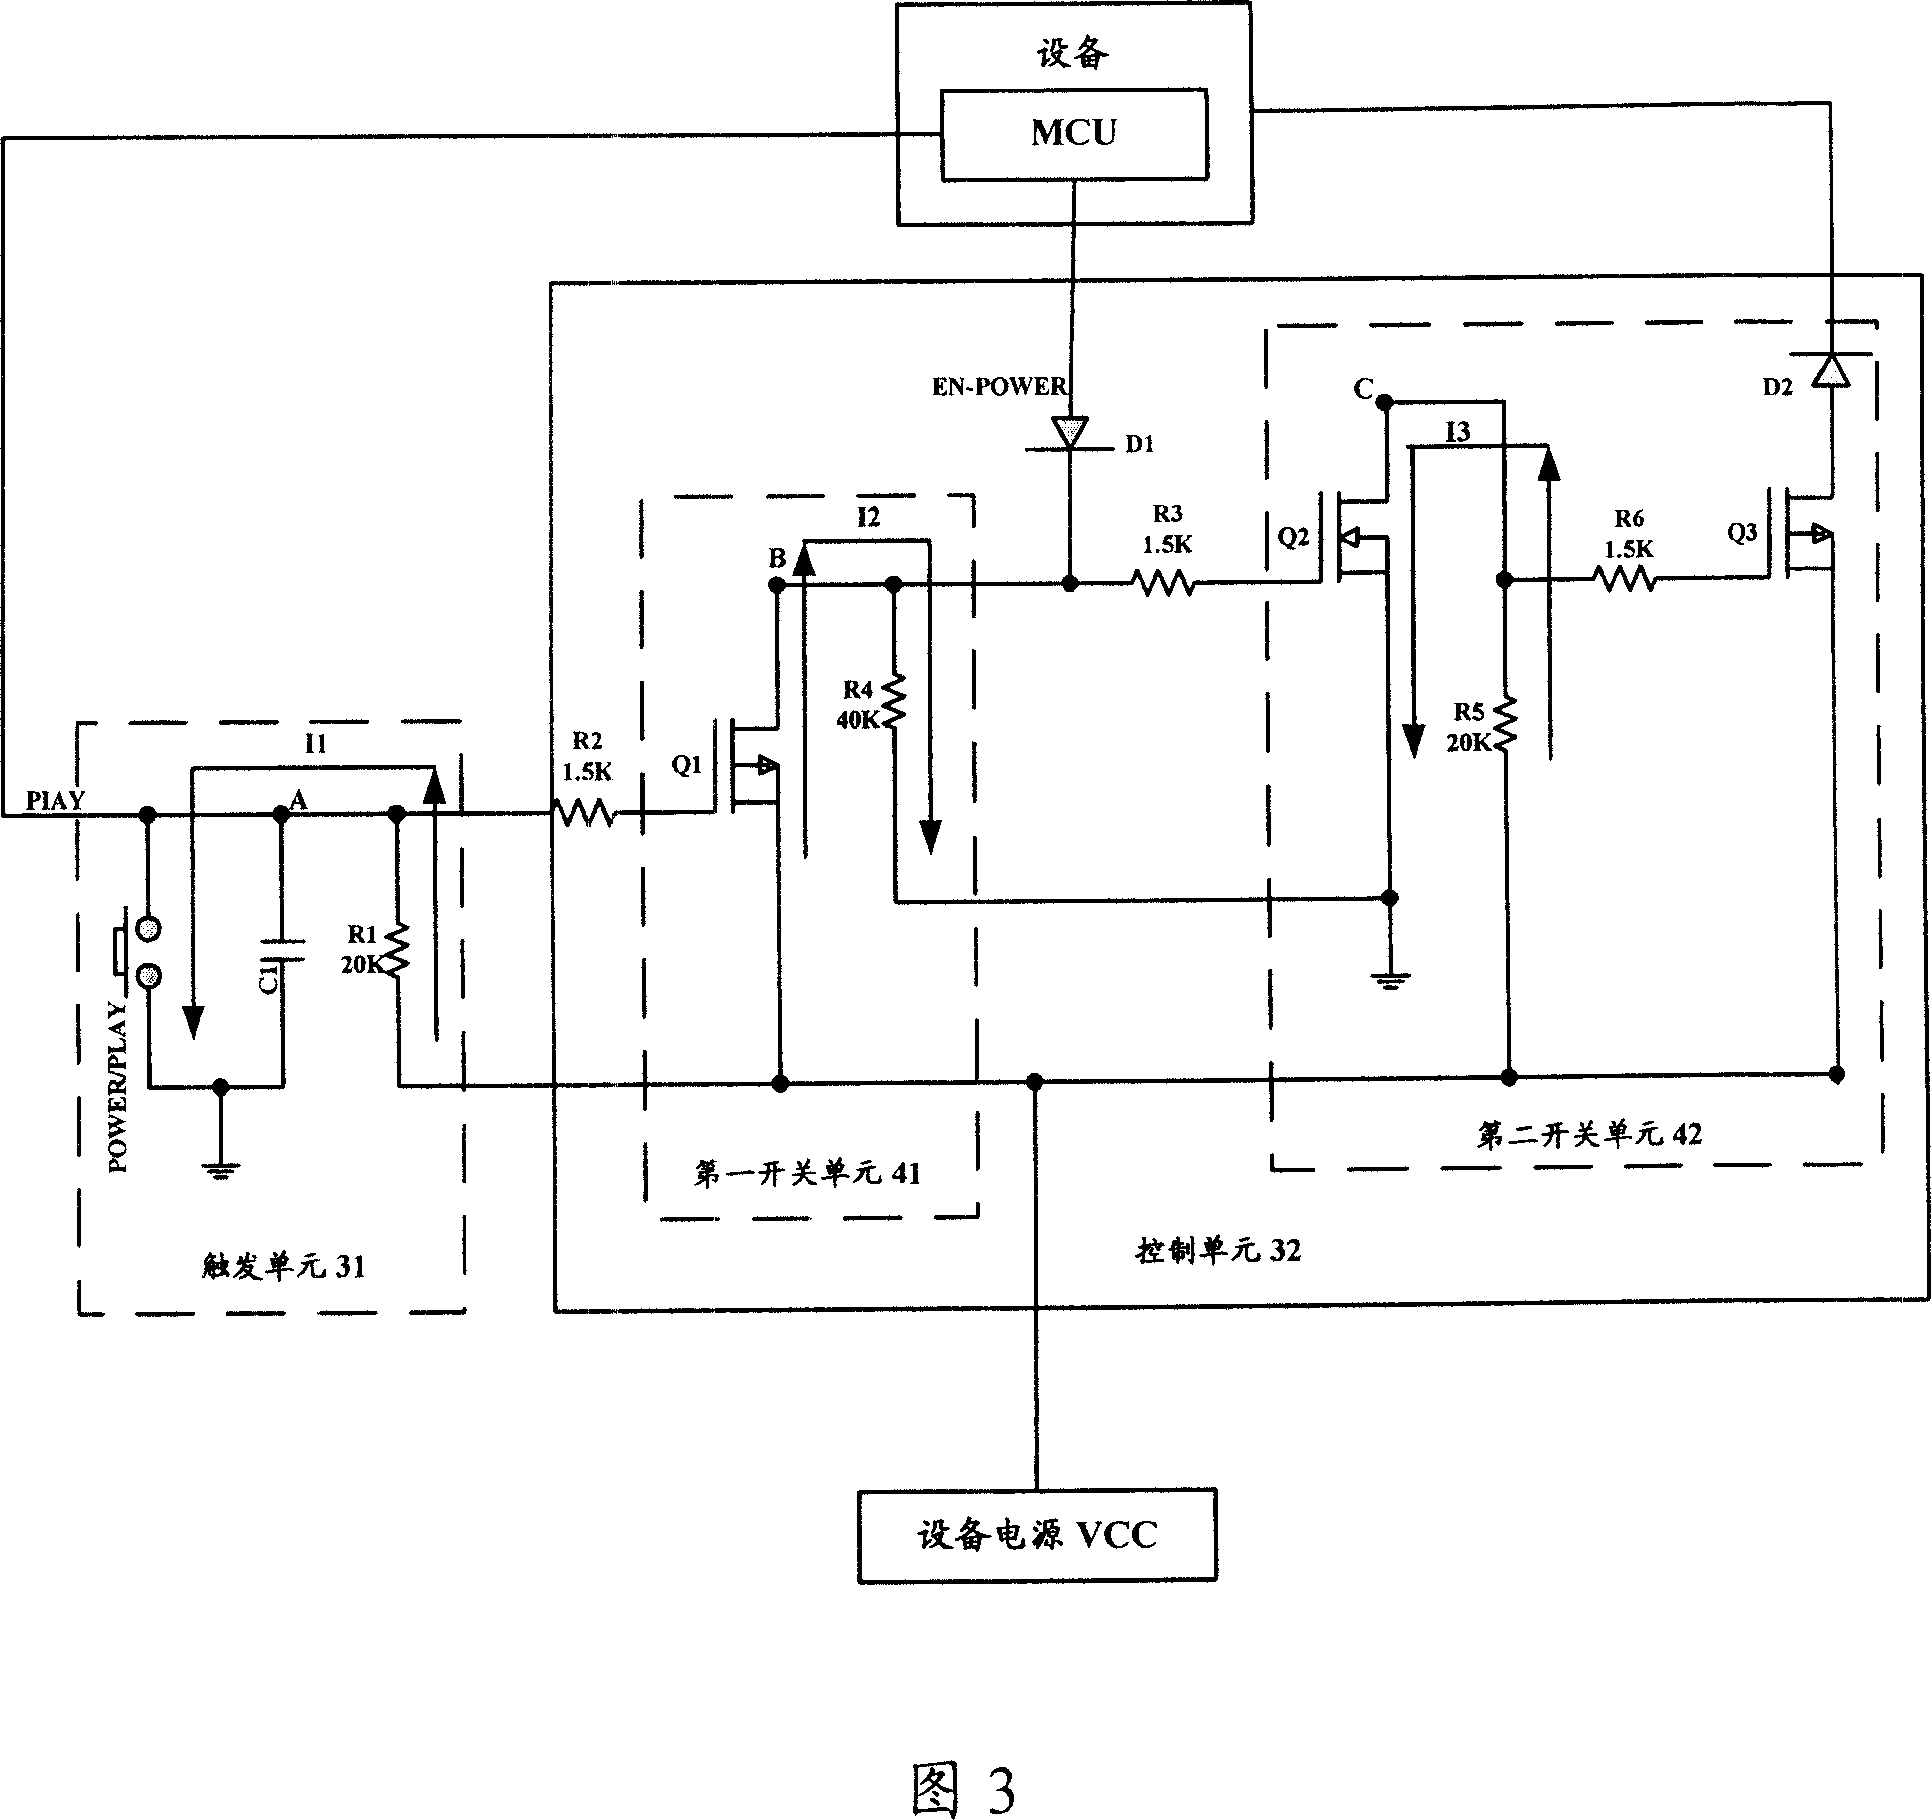 Apparatus for controlling power supply, method and electron system